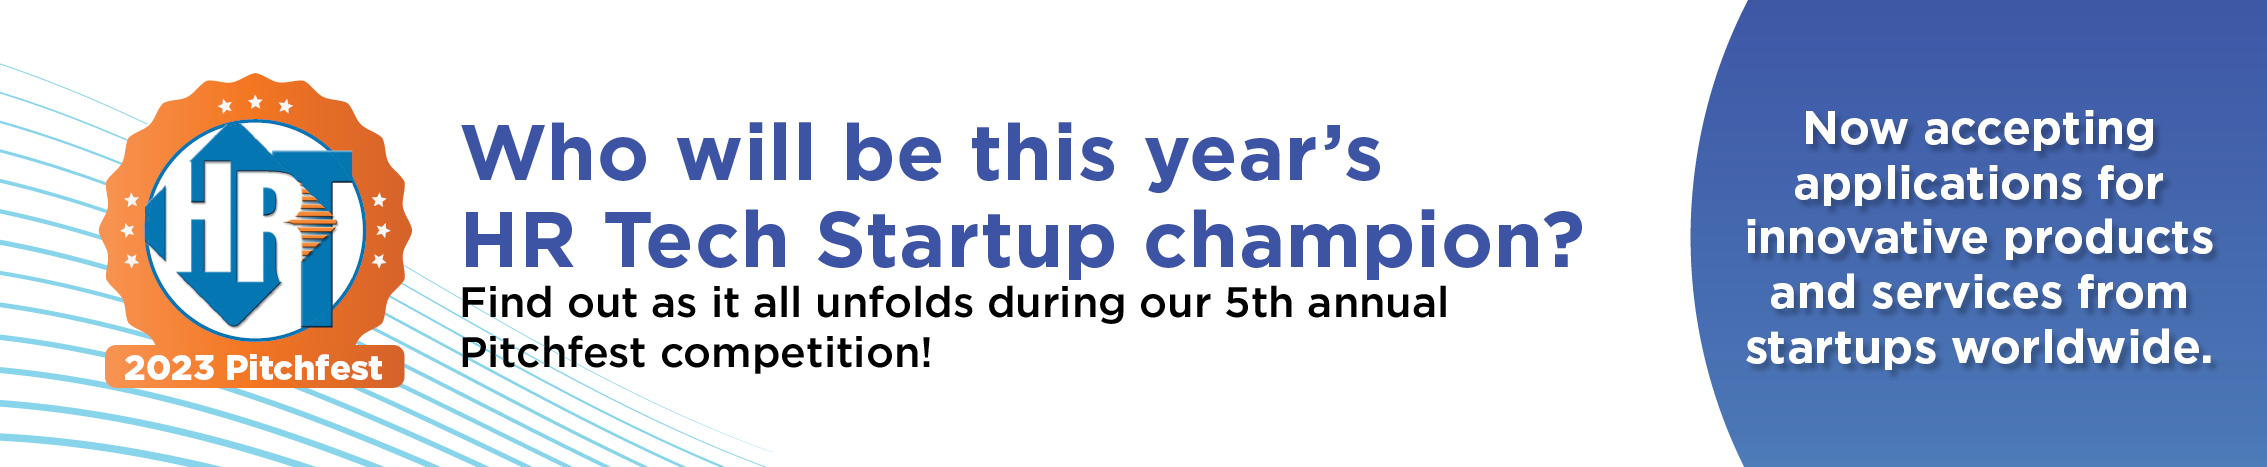 Who will be this year's HR Tech Startup champion?
Find out as it all unfolds during our 4th annual Pitchfest competition!
Now accepting applications for innovative products and services from startups worldwide.